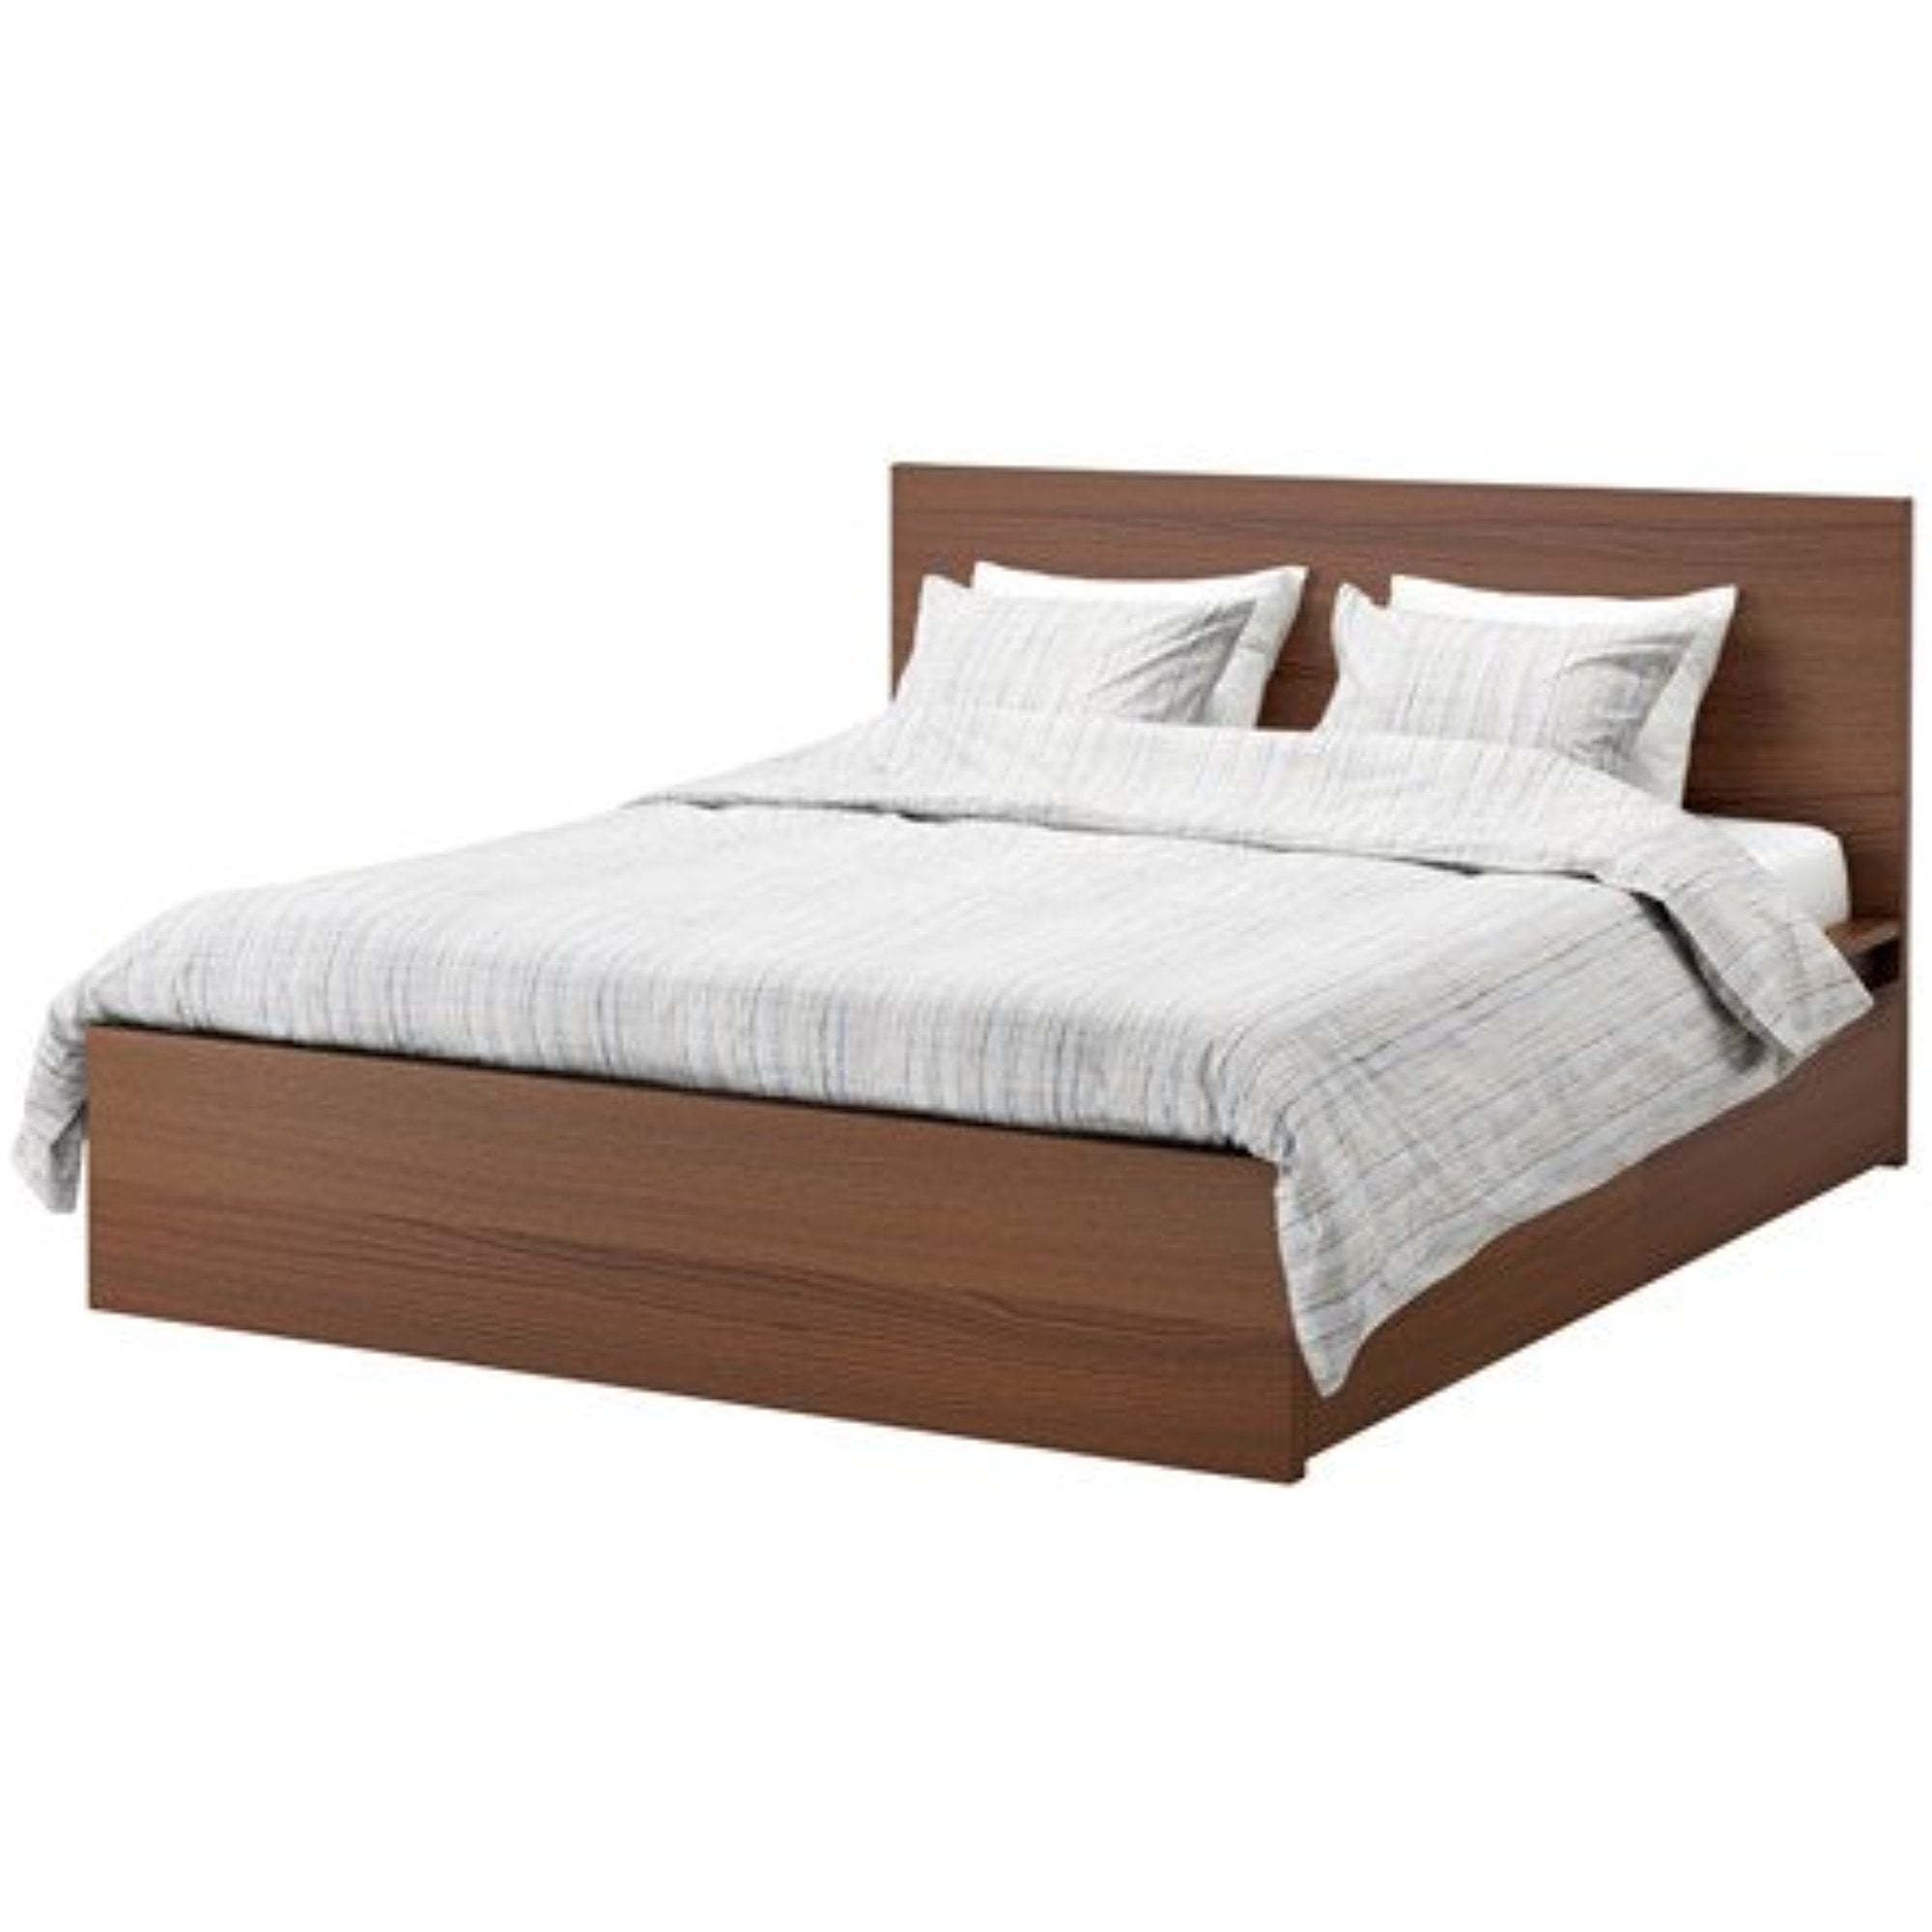 Ikea King Size High Bed Frame With 2, Ikea King Bed With Storage